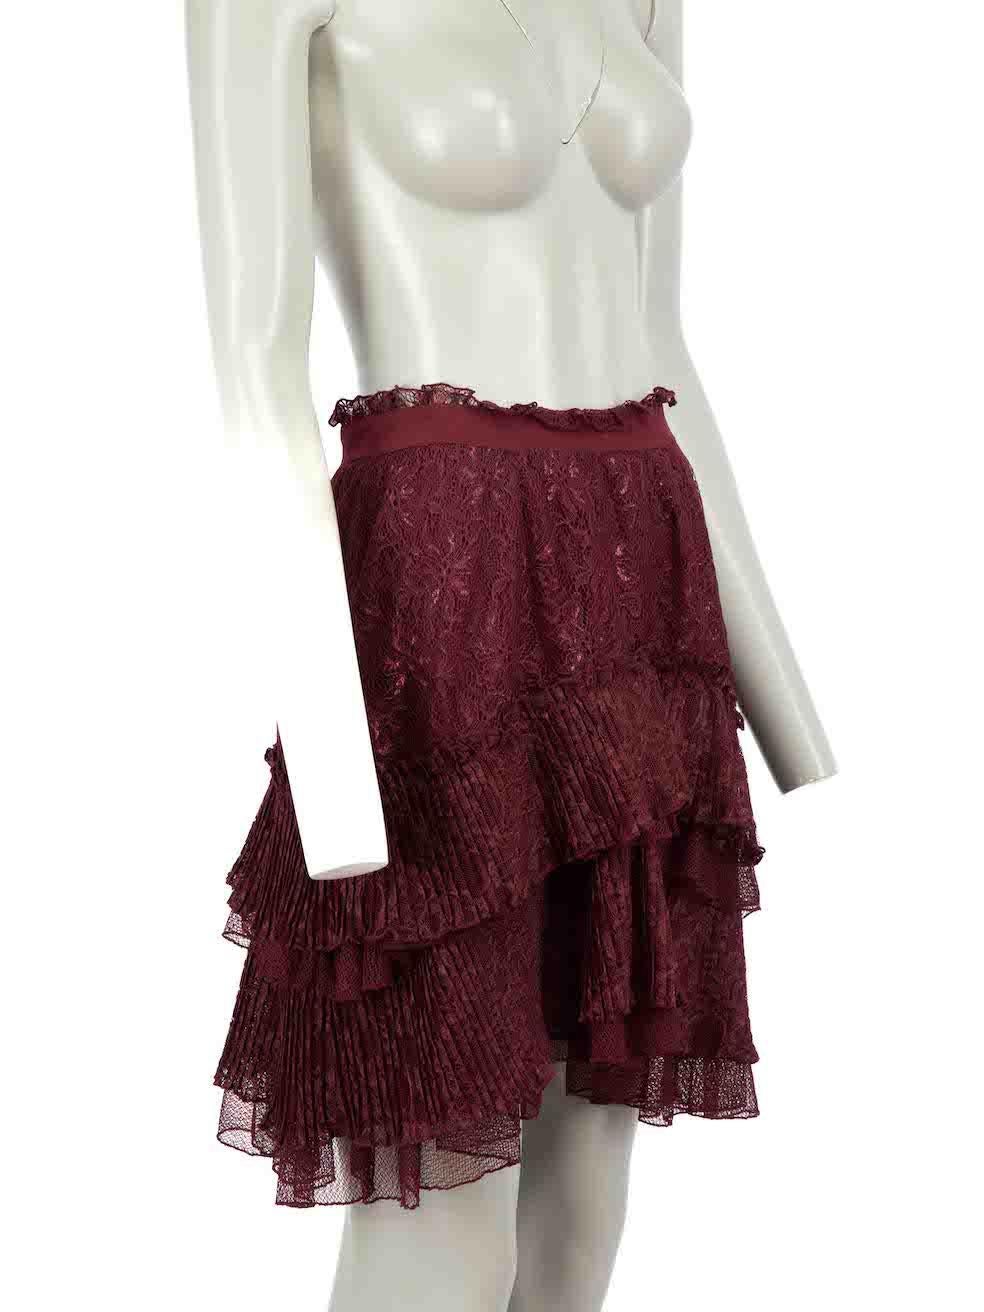 CONDITION is Very good. Minimal wear to skirt is evident. Minimal wear to the lining with the composition label having been removed on this used Just Cavalli designer resale item.
 
 
 
 Details
 
 
 Burgundy
 
 Lace
 
 Tiered skirt
 
 Mini
 
 Side